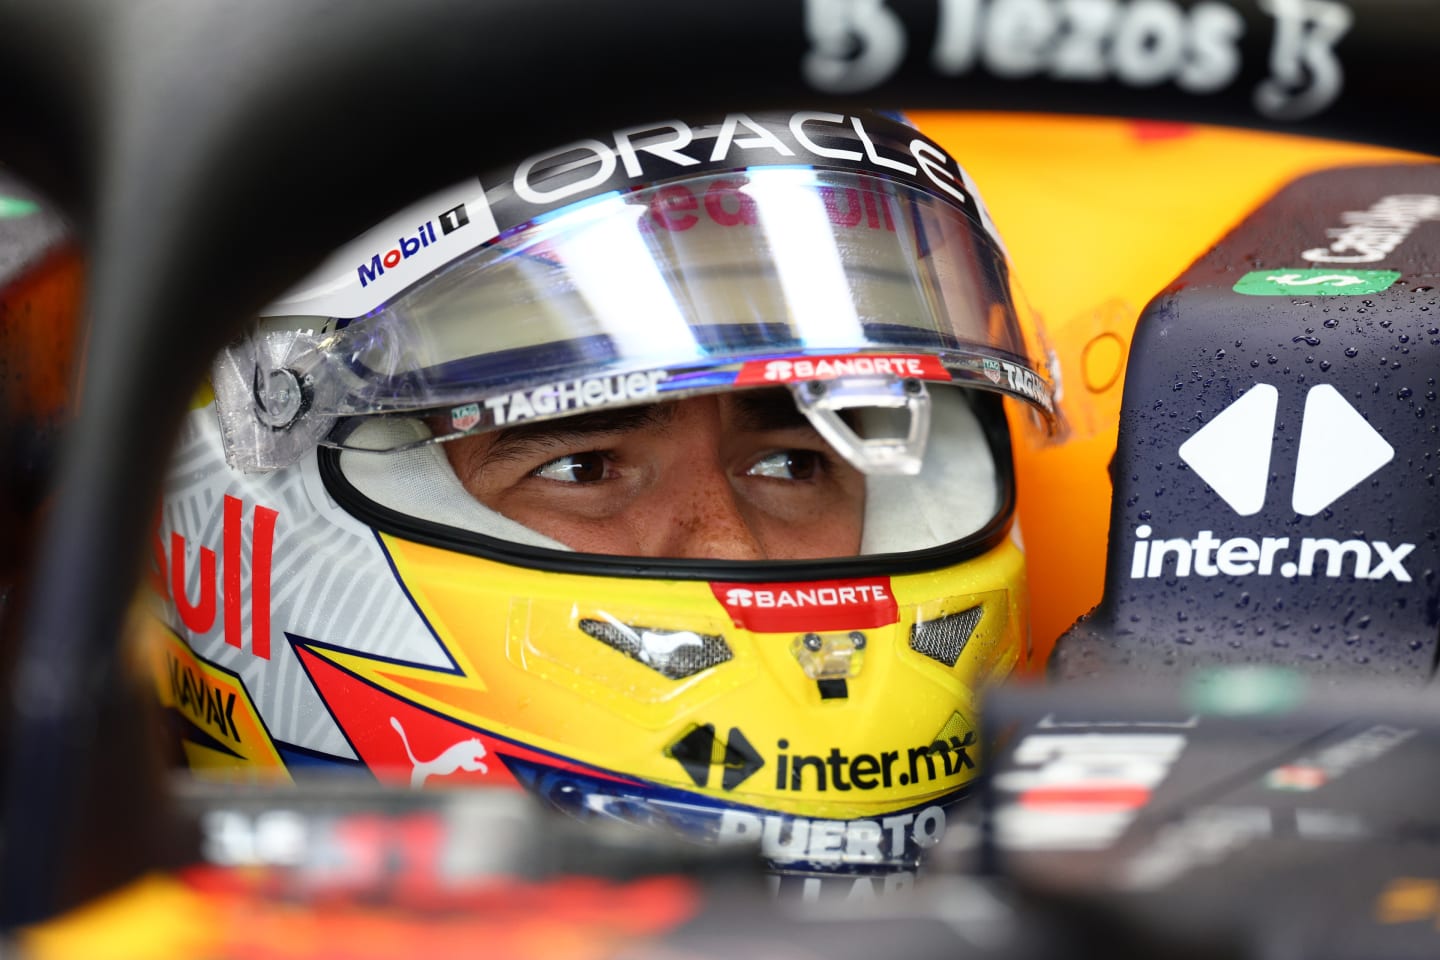 NORTHAMPTON, ENGLAND - JULY 01: Sergio Perez of Mexico and Oracle Red Bull Racing prepares to drive in the garage during practice ahead of the F1 Grand Prix of Great Britain at Silverstone on July 01, 2022 in Northampton, England. (Photo by Clive Rose/Getty Images)